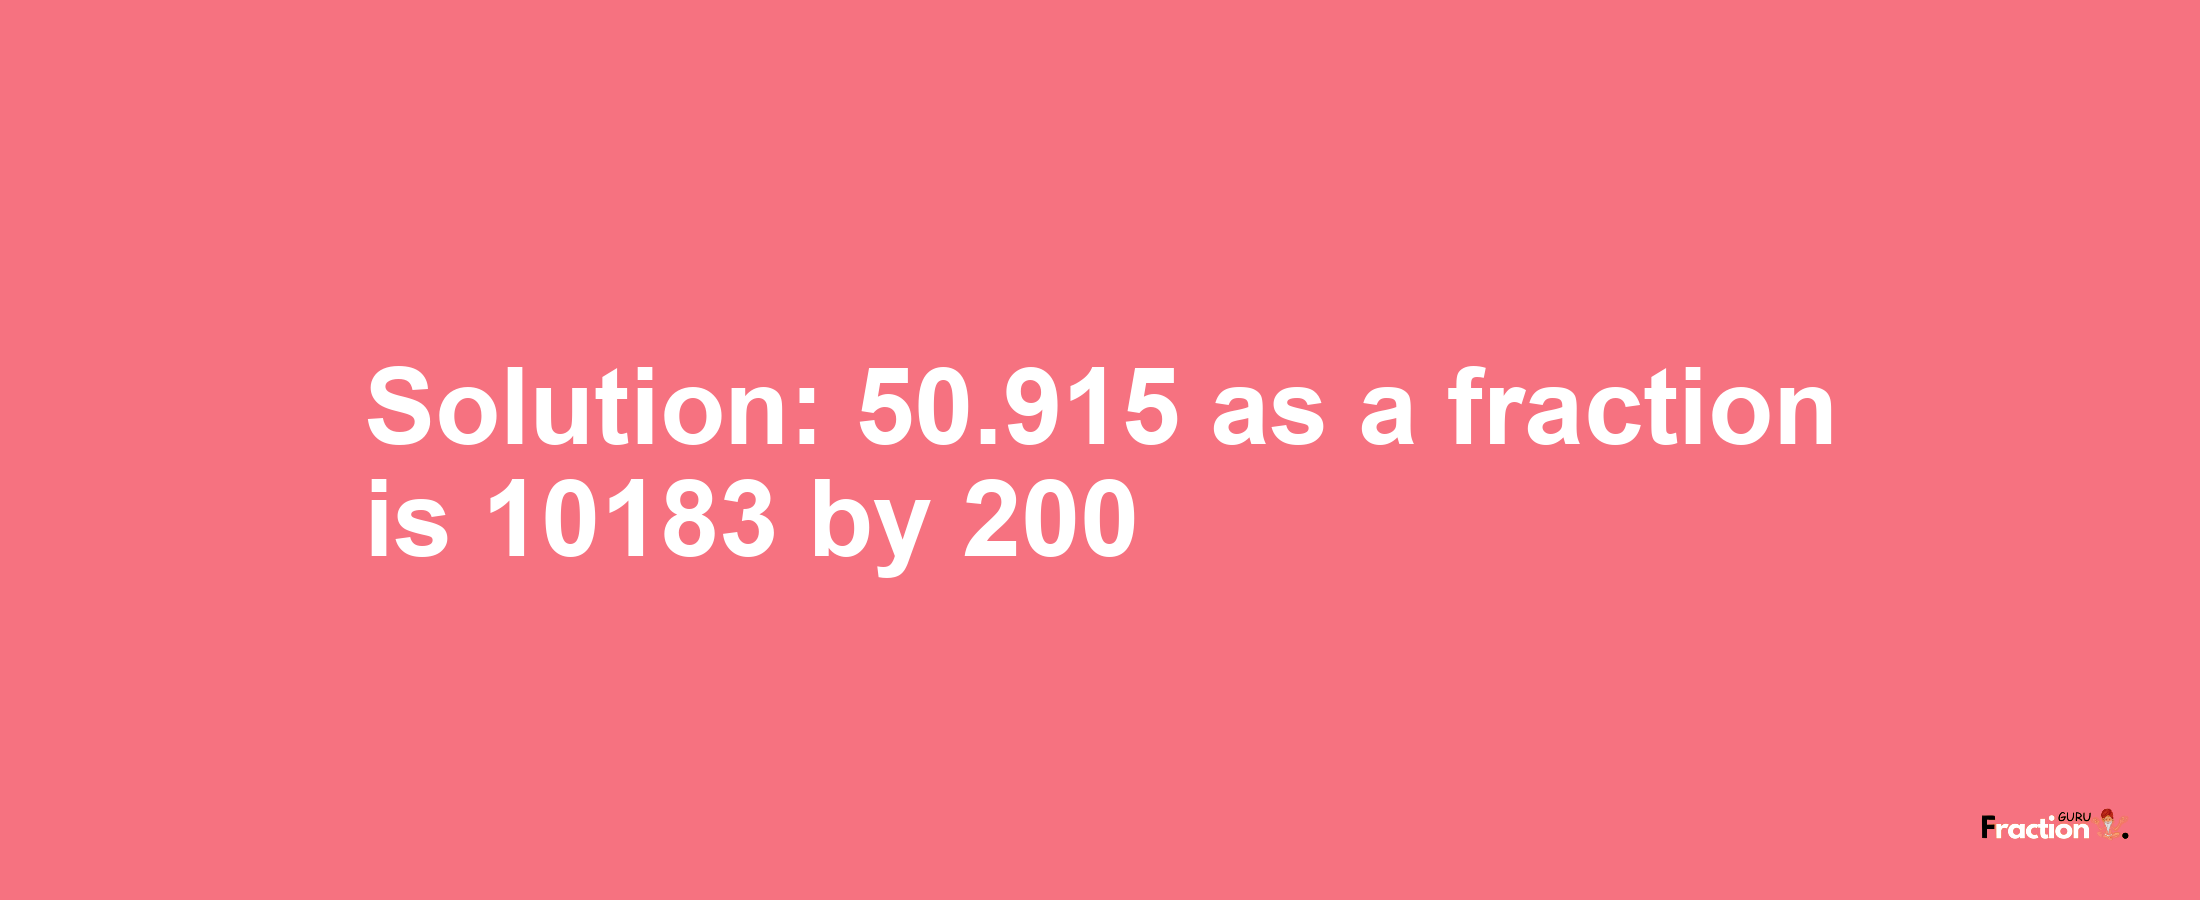 Solution:50.915 as a fraction is 10183/200